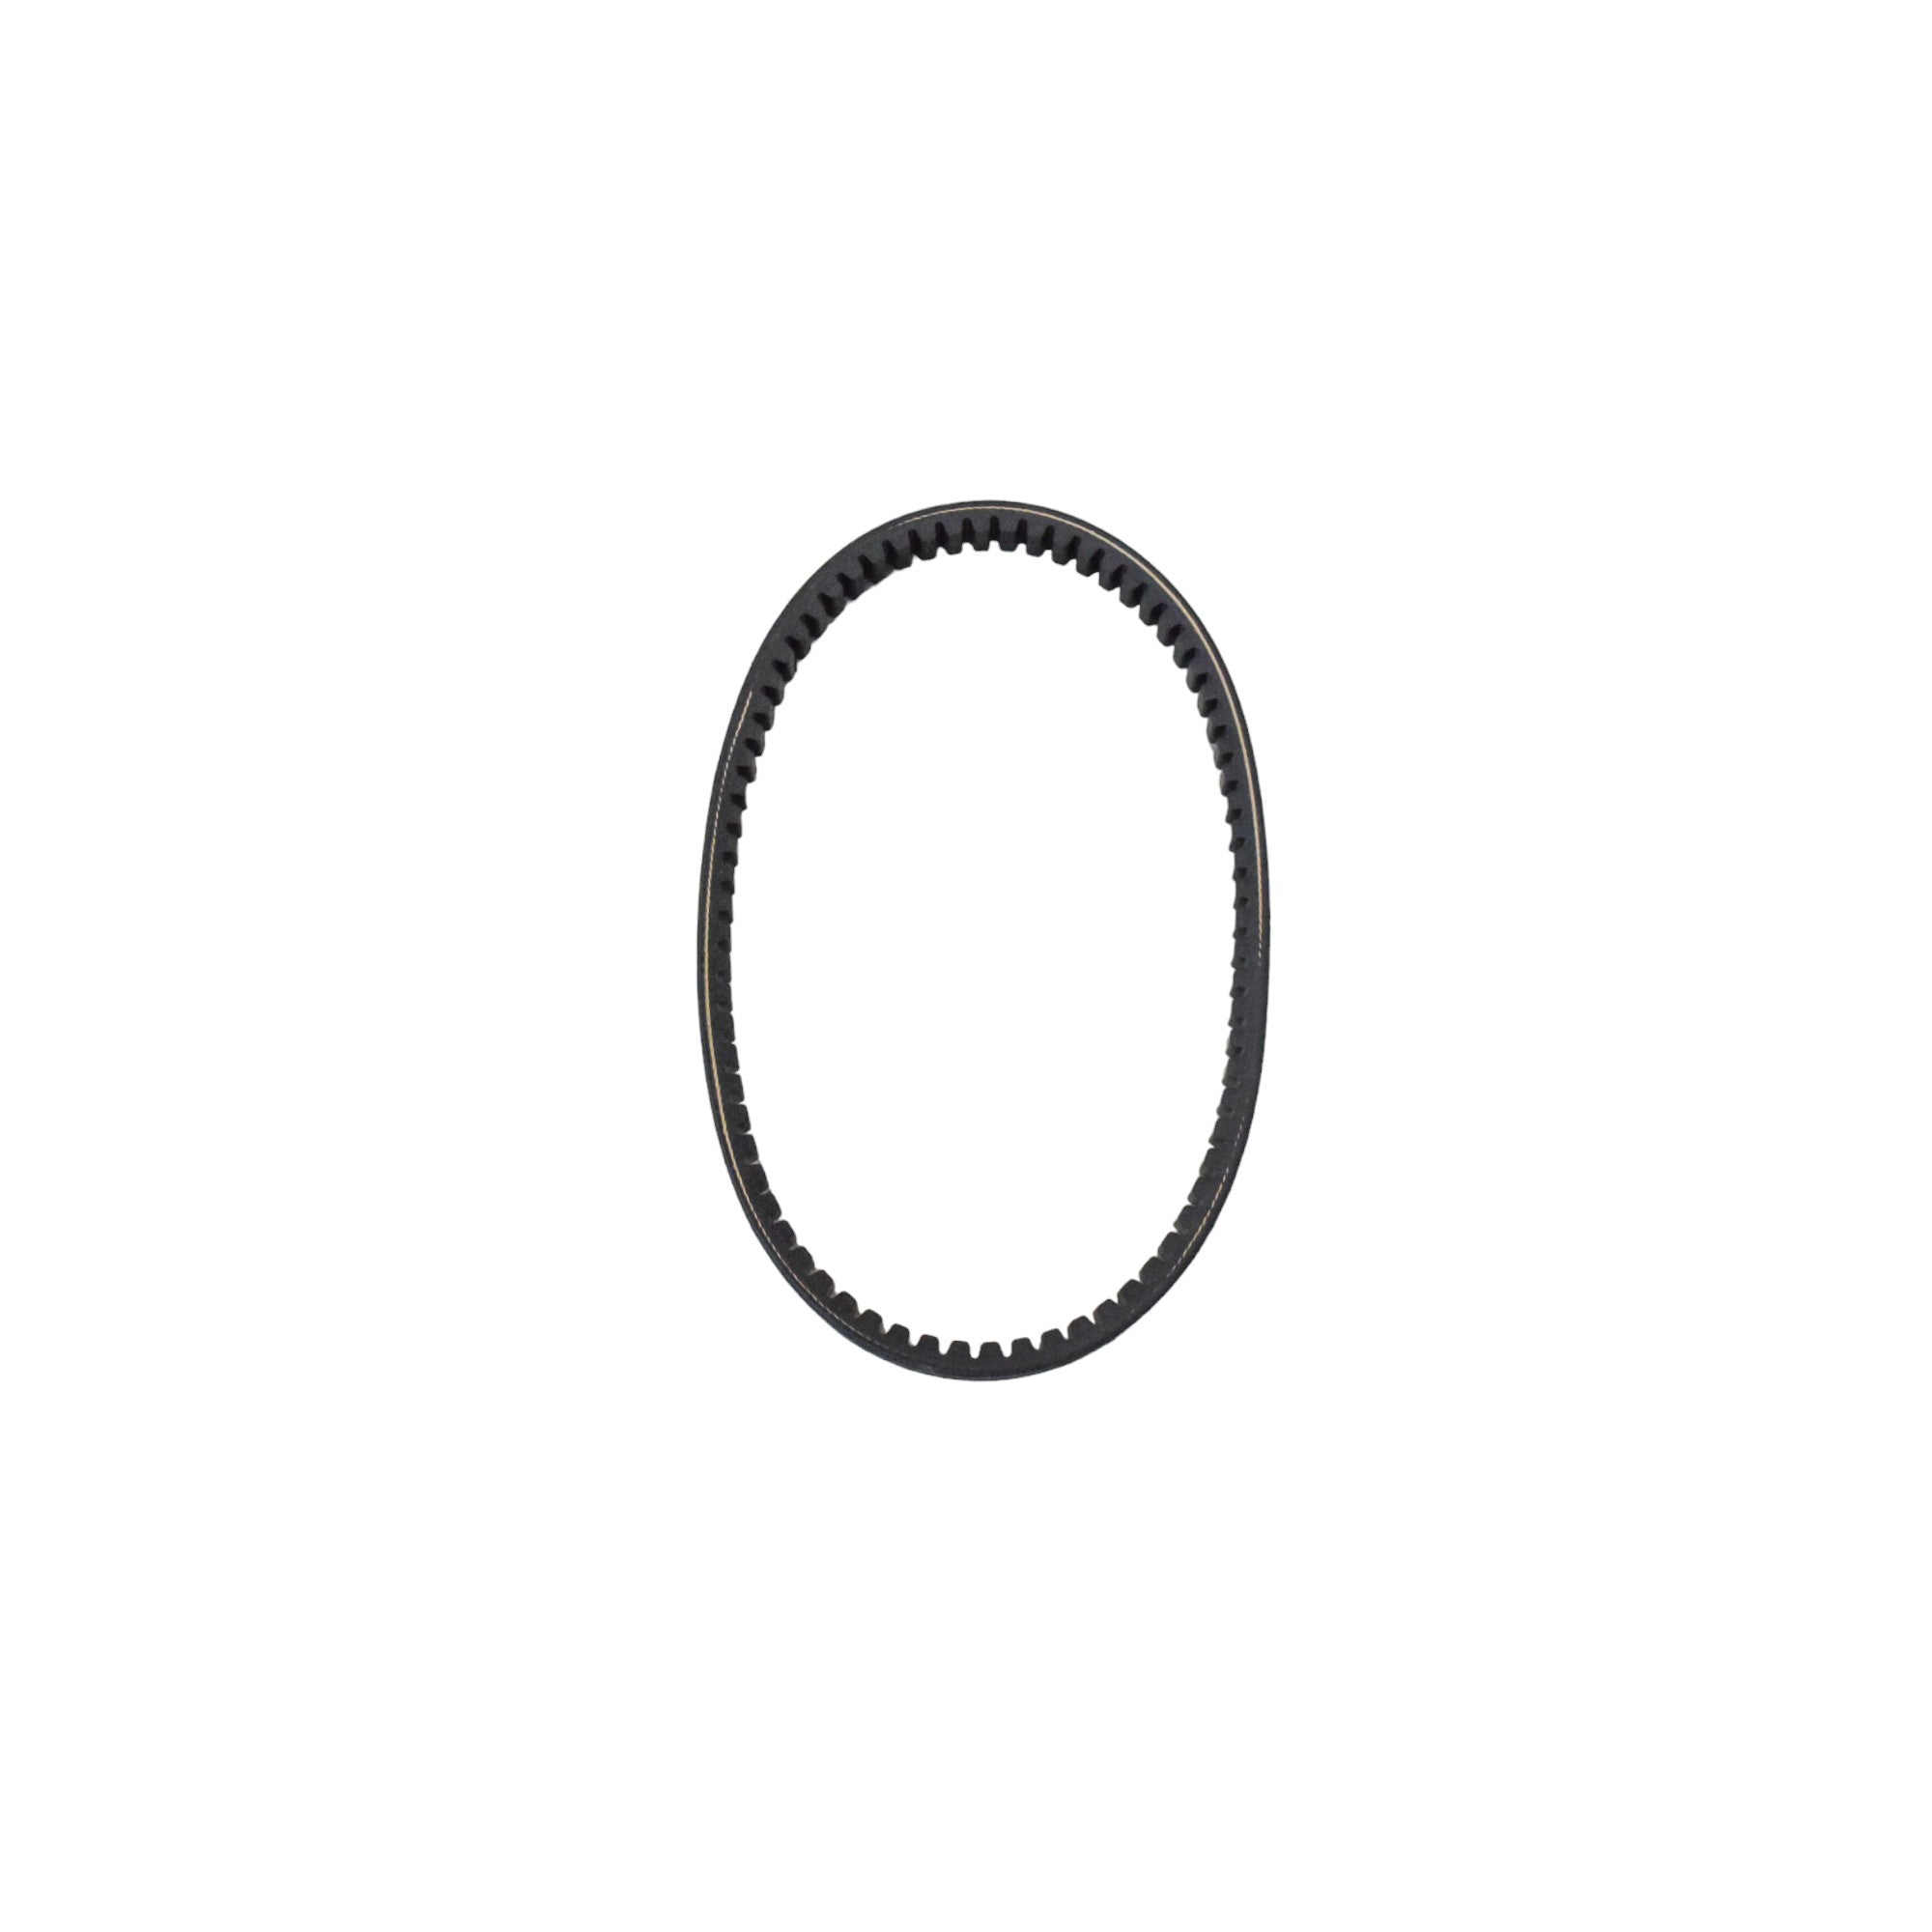 Ultimax UA454 Drive Belt for Polaris RZR 170 OEM Replacement for 0454497, 454497 (Made in USA)